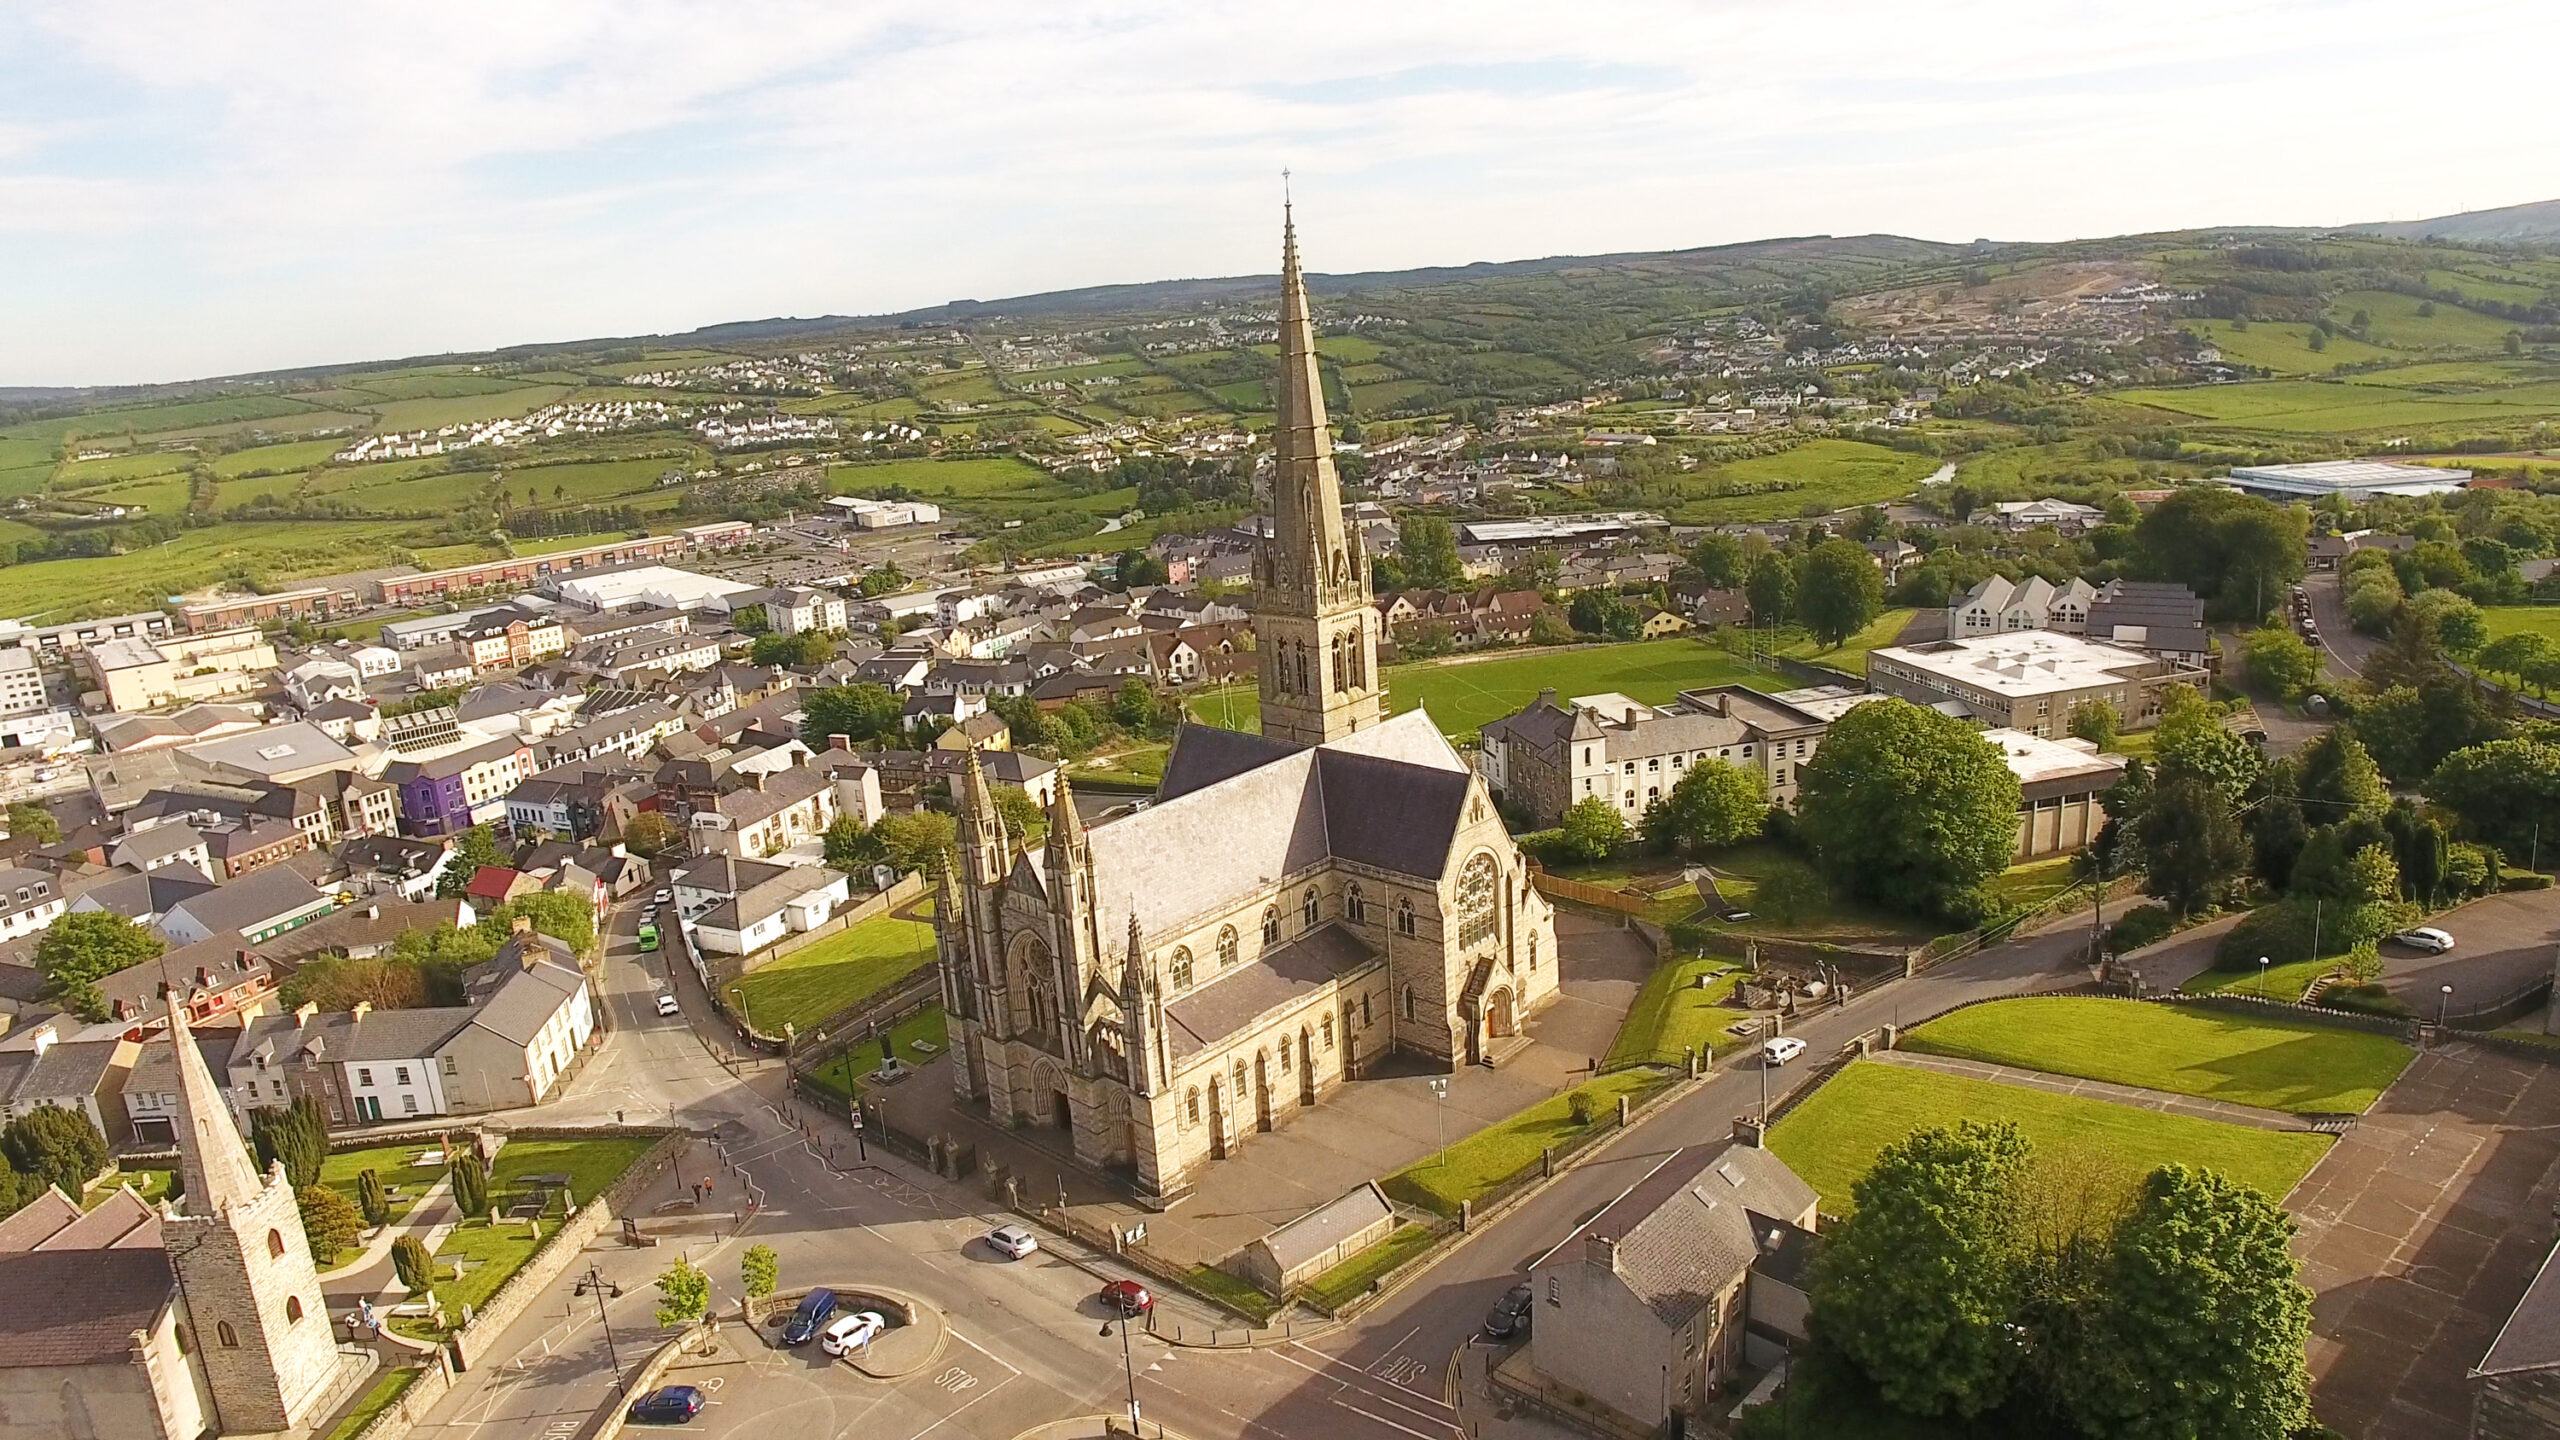 View of the cathedral and surrounding downtown of Letterkenny. The town is surrounded by beautiful rolling Irish hills.